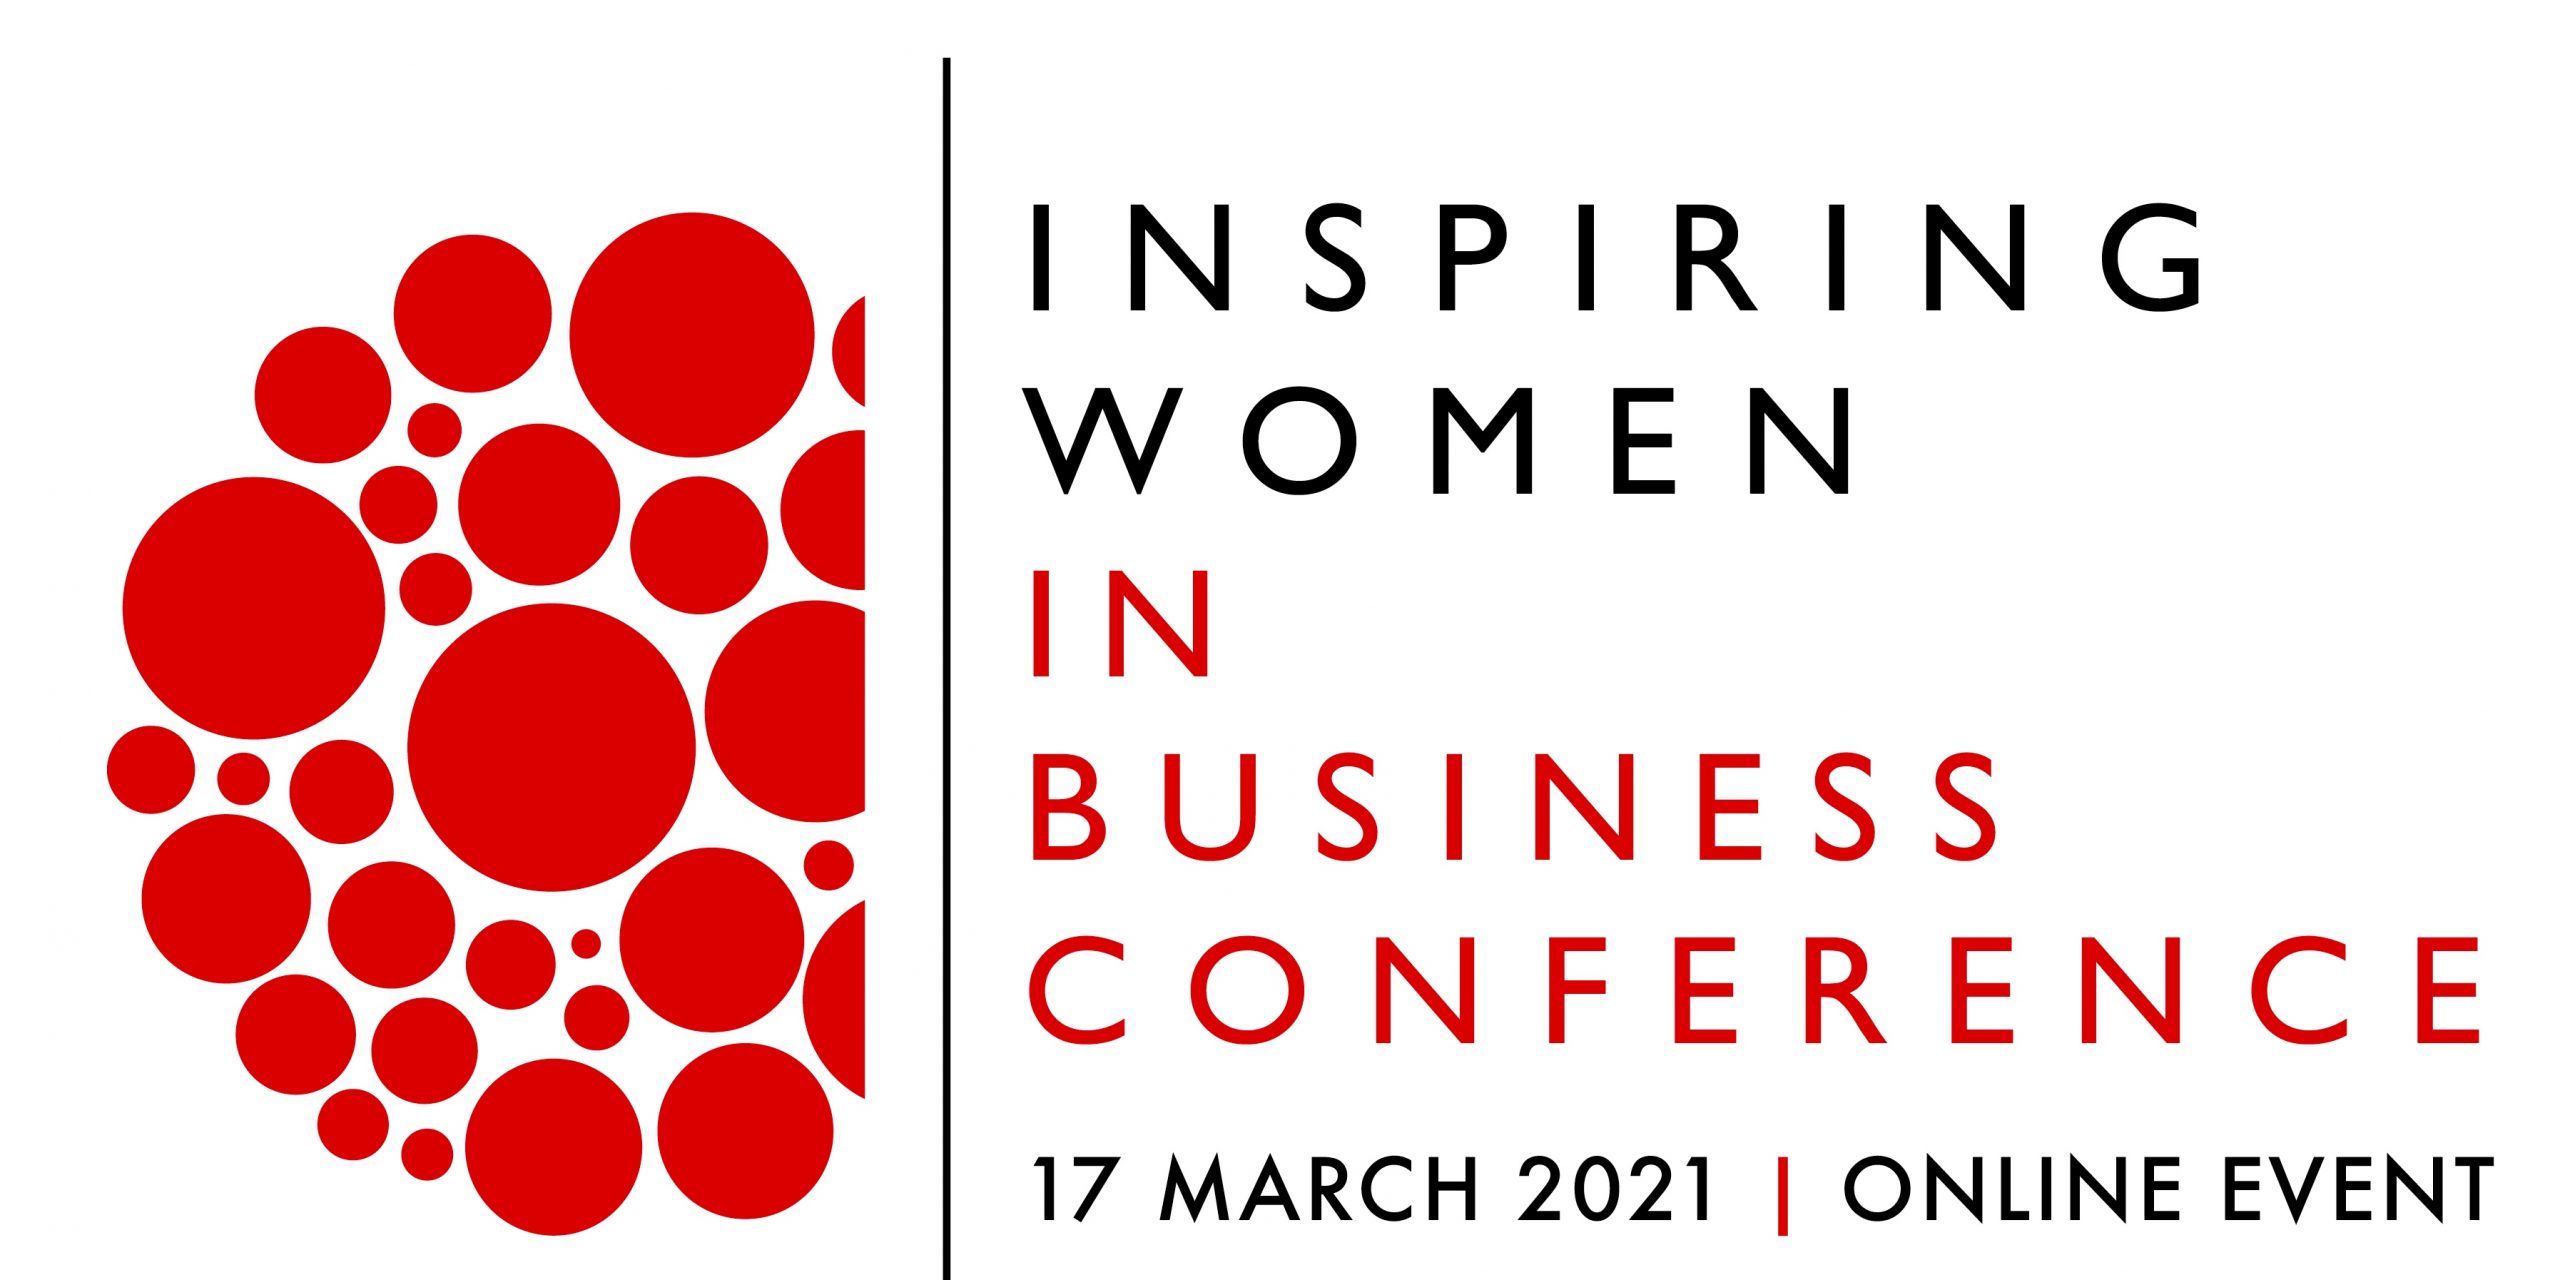 Inspiring Women in Business Conference